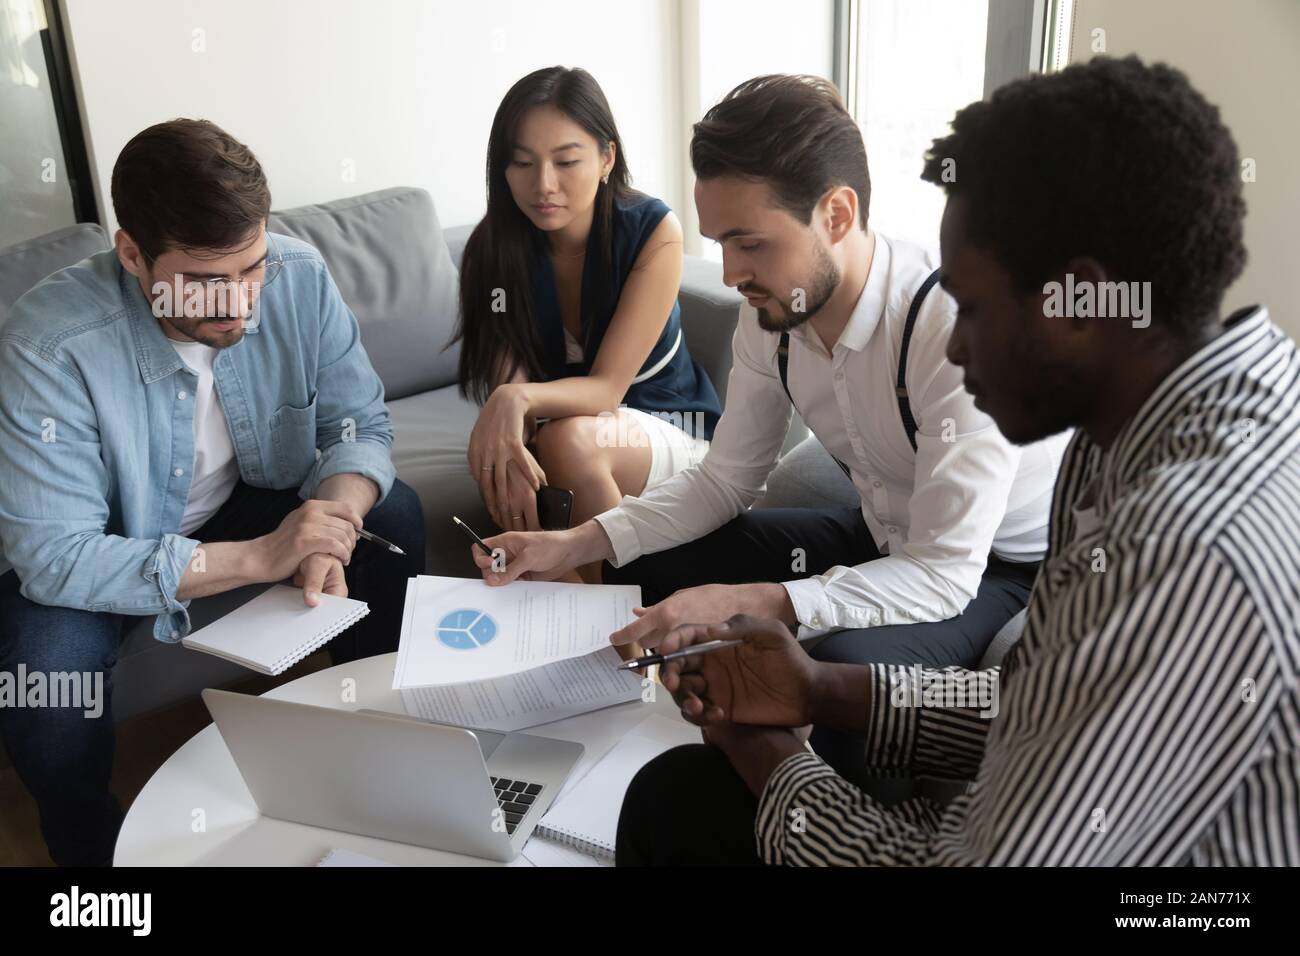 Multiethnic businesspeople brainstorm discussing paperwork at meeting Stock Photo